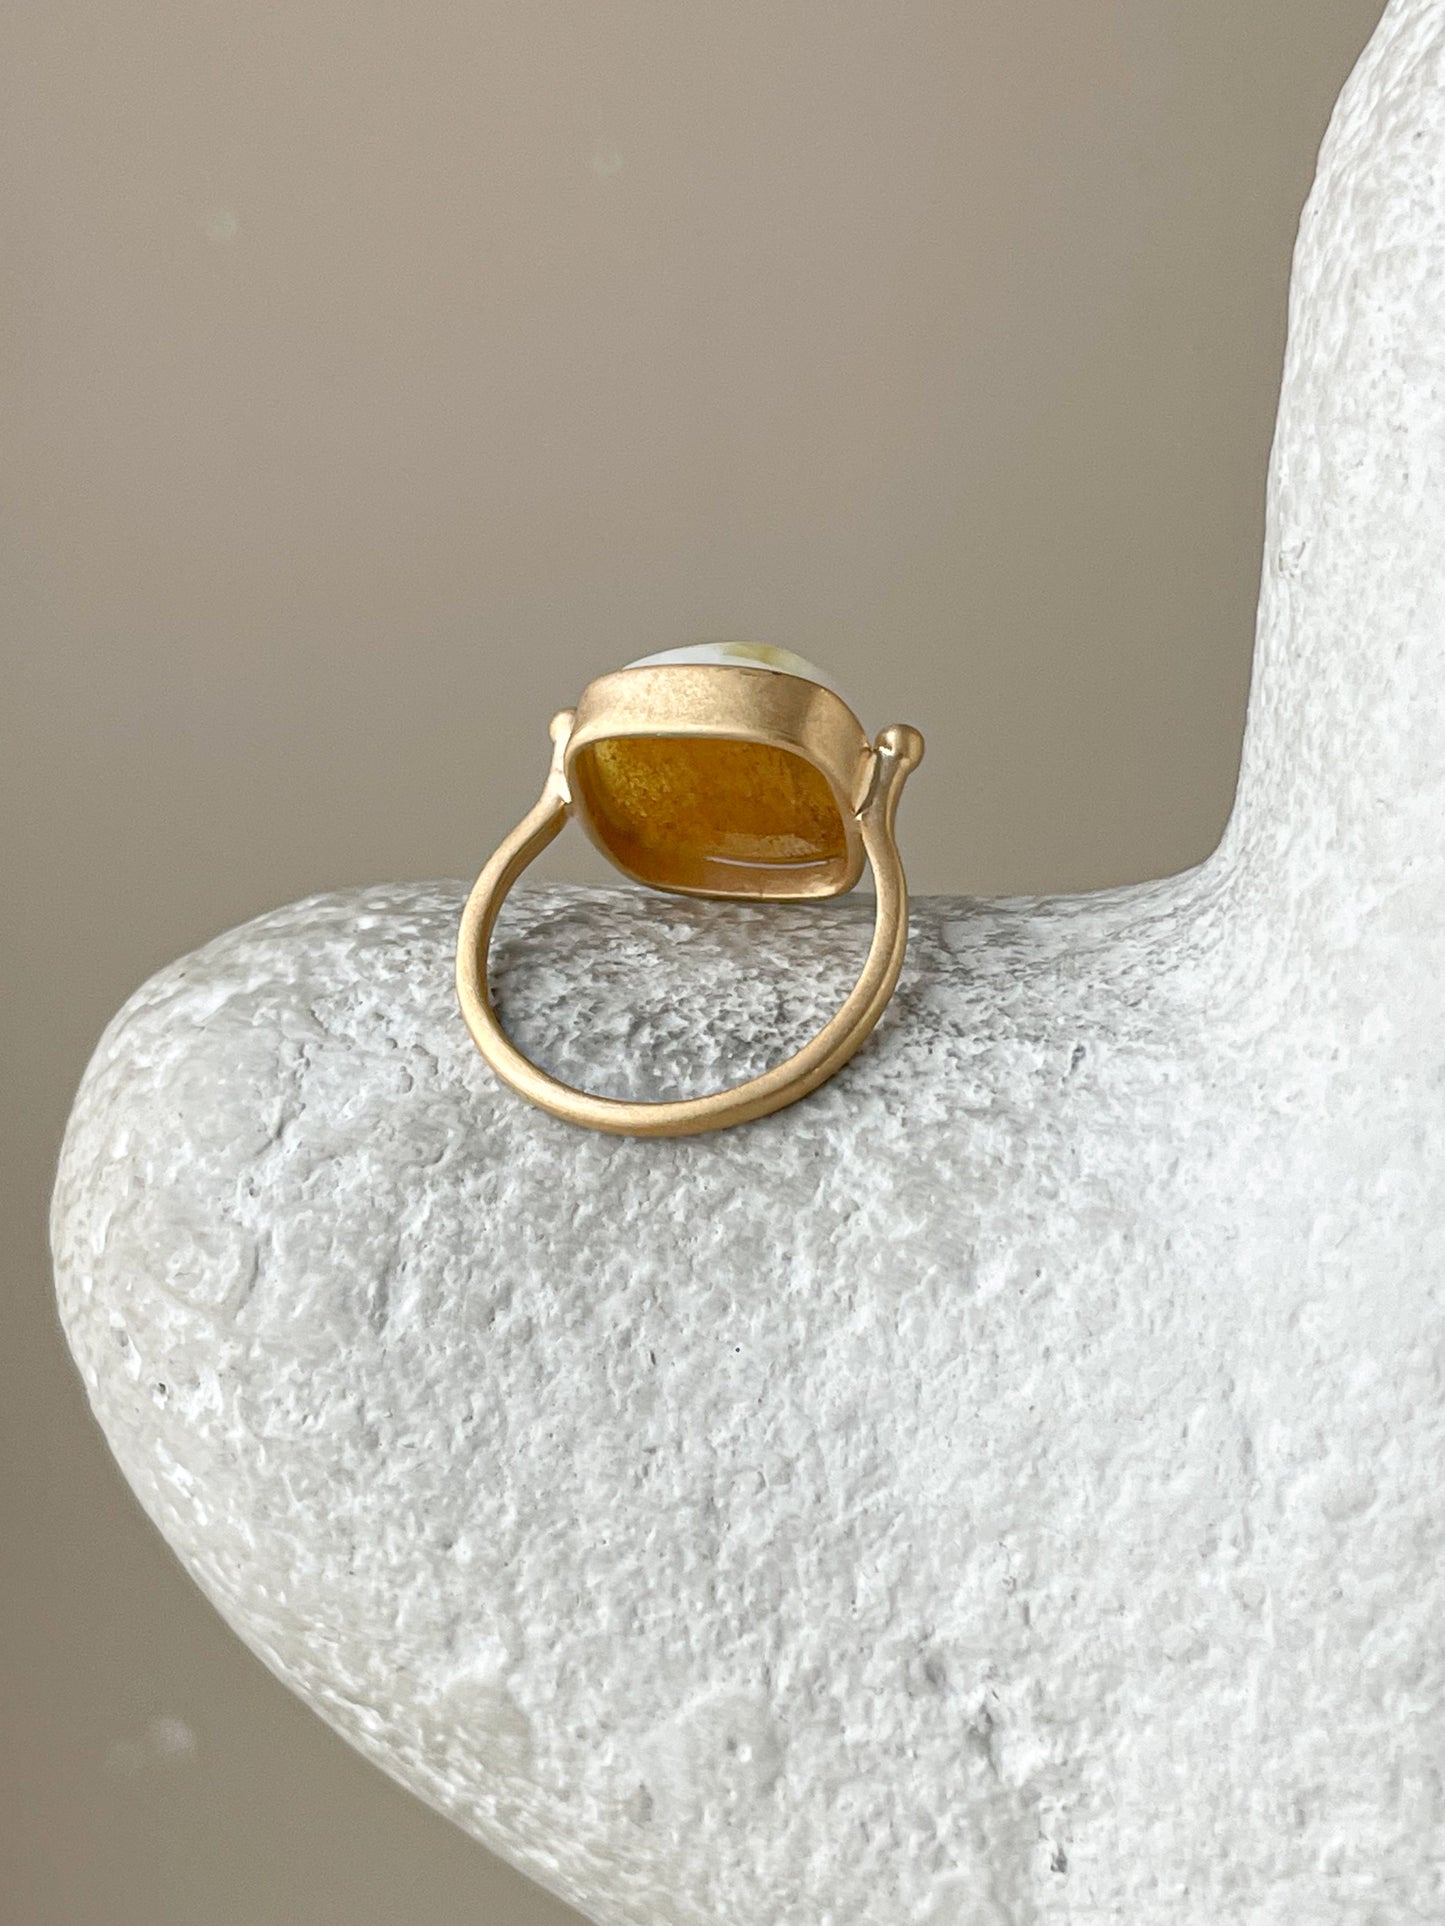 Butterscotch amber ring - Gold plated silver - Vintage style ring collection - Size 6 1/2